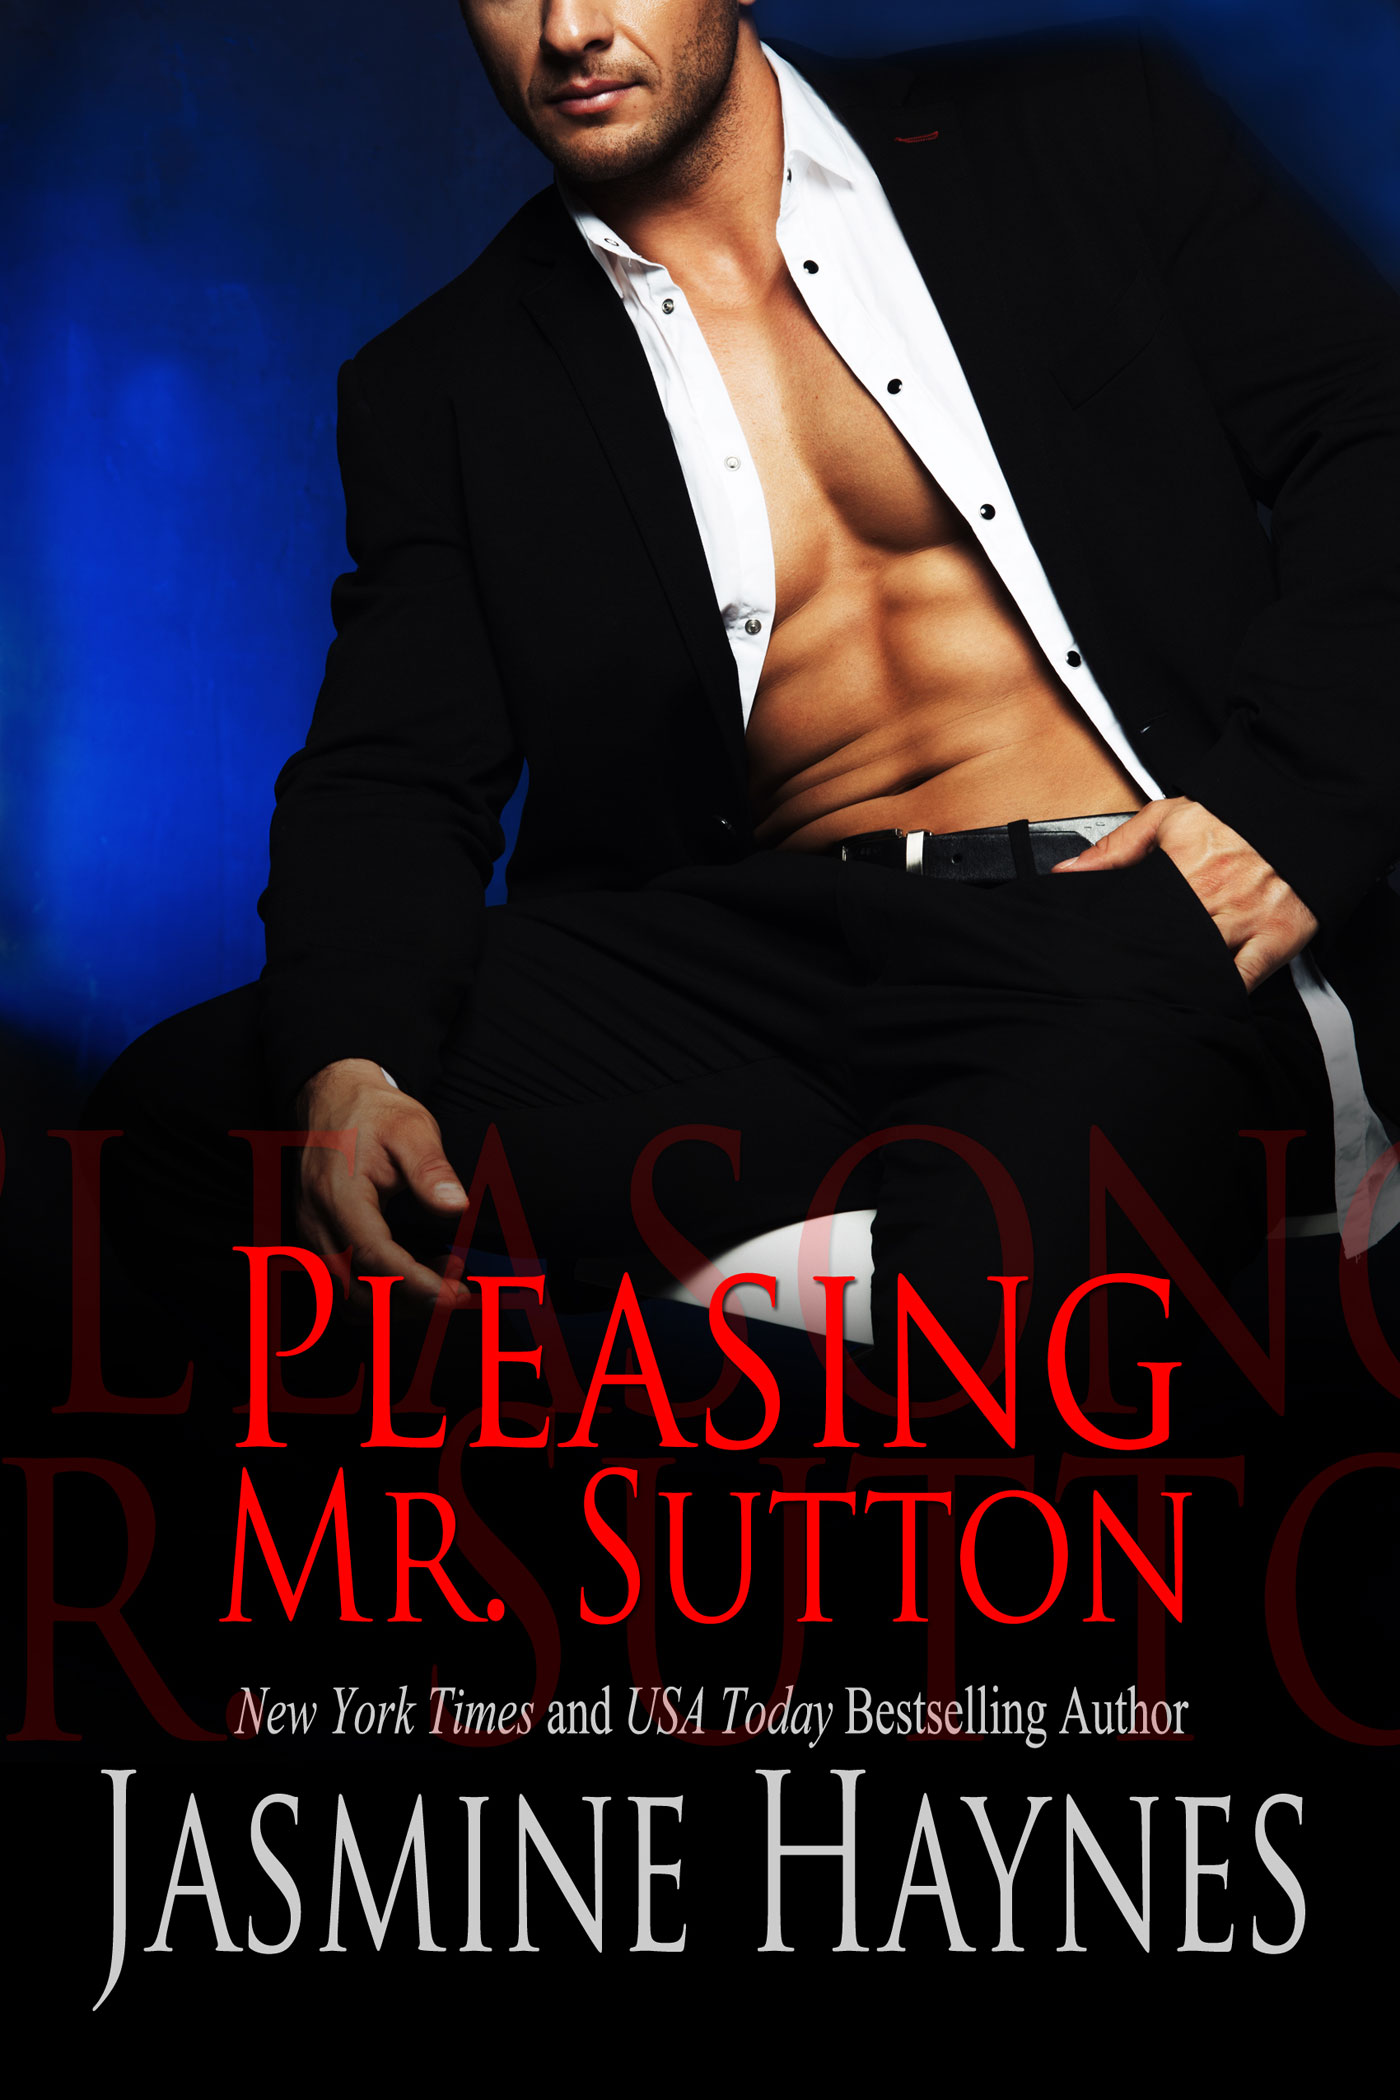 Cover of Pleasing Mr. Sutton by New York Times and USA Today Bestselling Author Jasmine Haynes